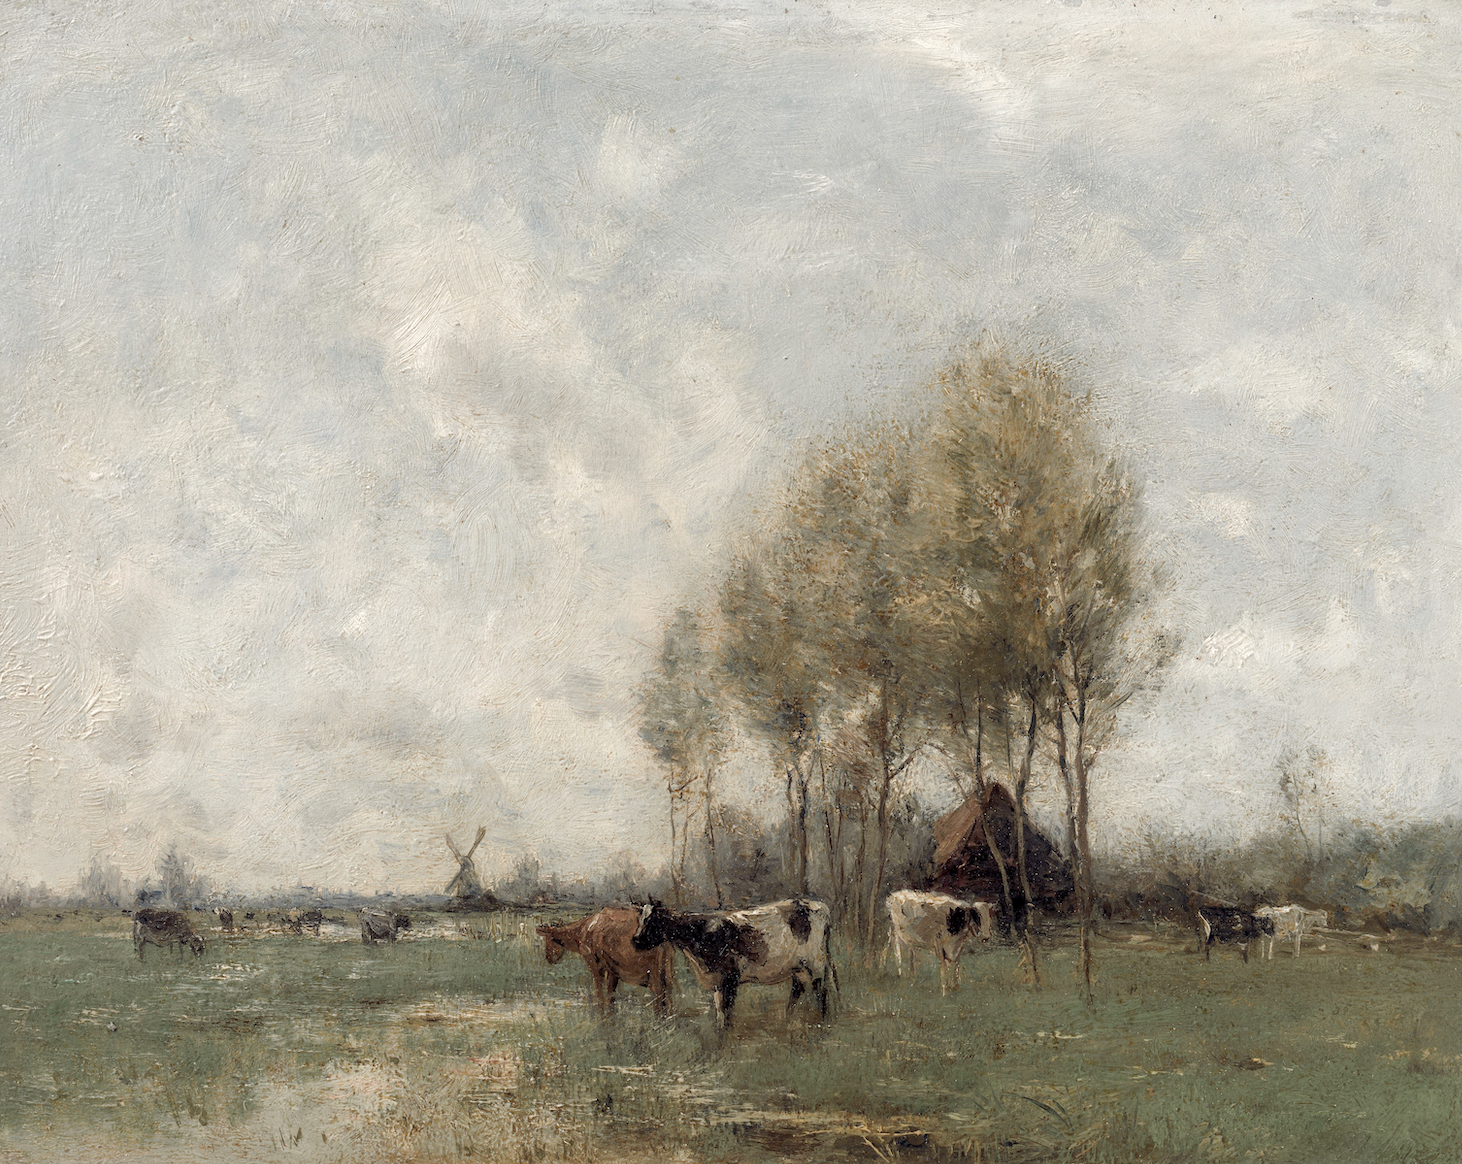 Vintage Landscape Print | Cows in the Field